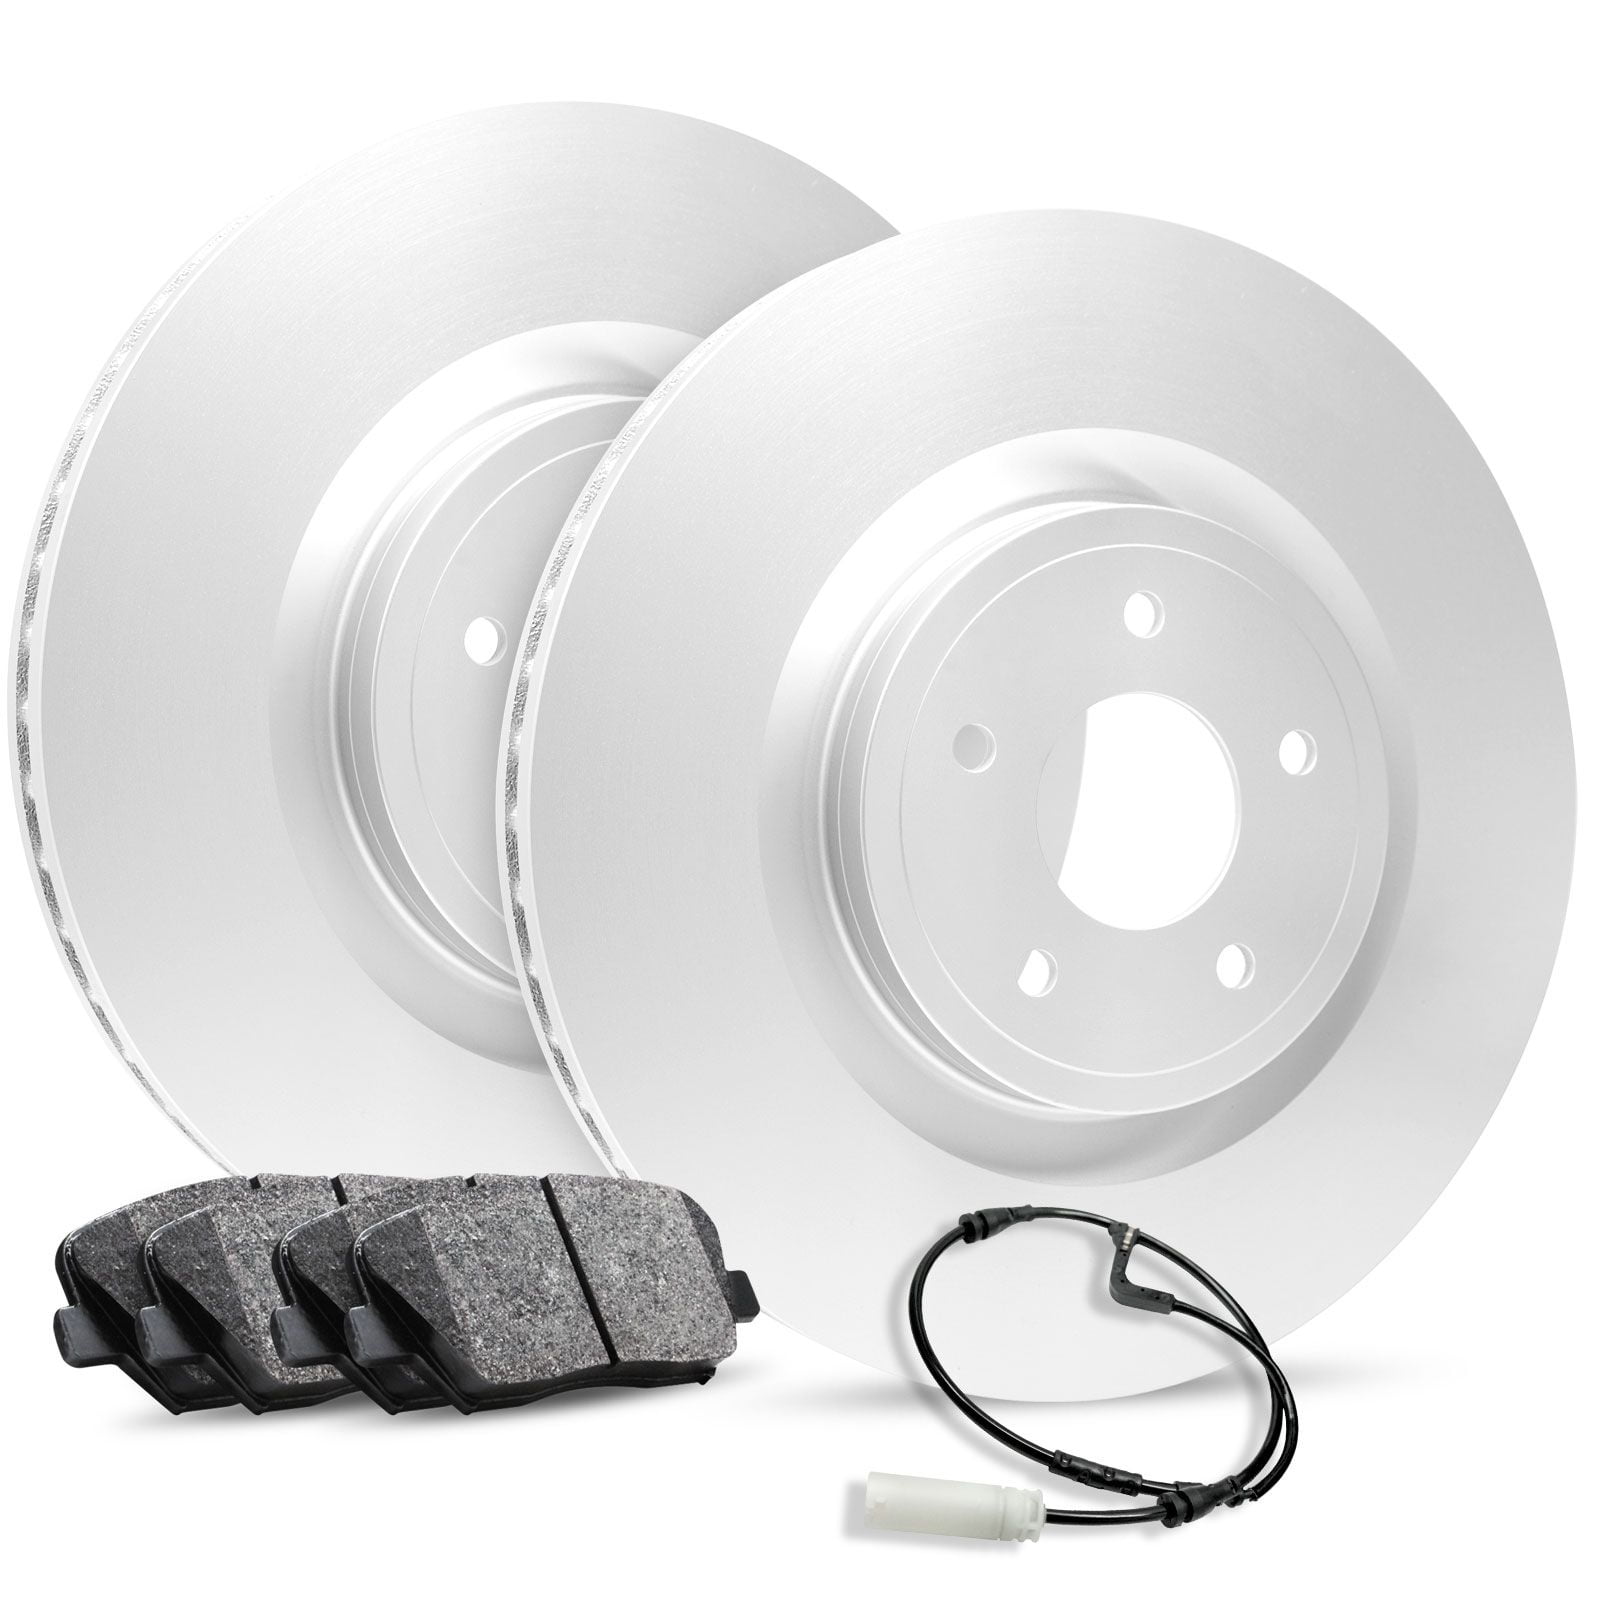 Hardware Kit Front Brake Rotors with Ceramic Pads and Sensor Wire 1PB.31130.52